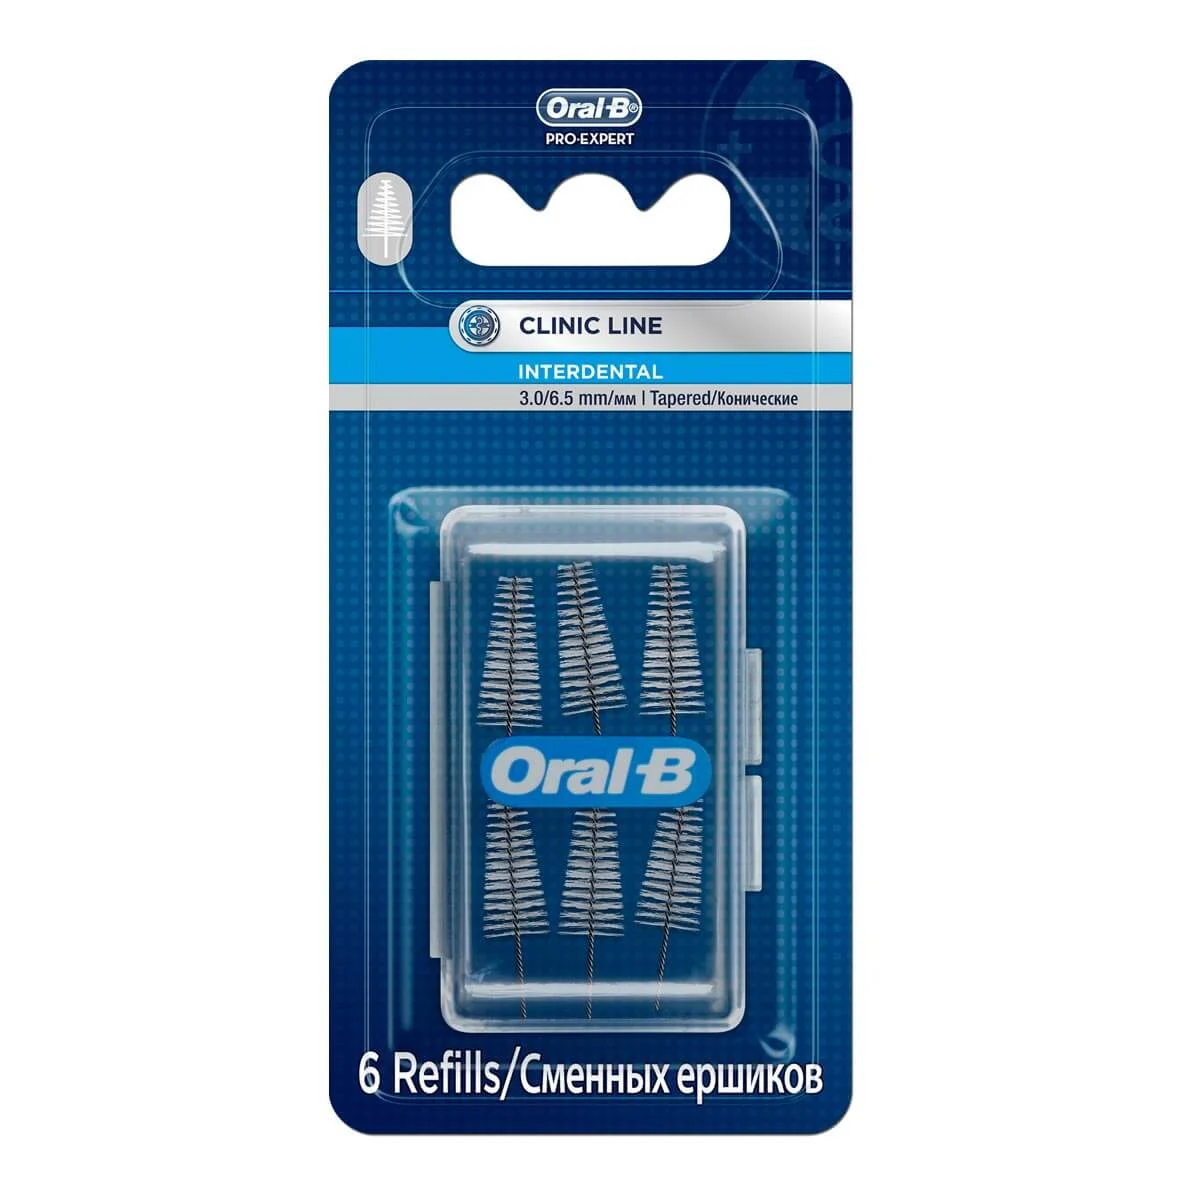 Oral-B Pro-Expert Clinic Line Interdental undefined